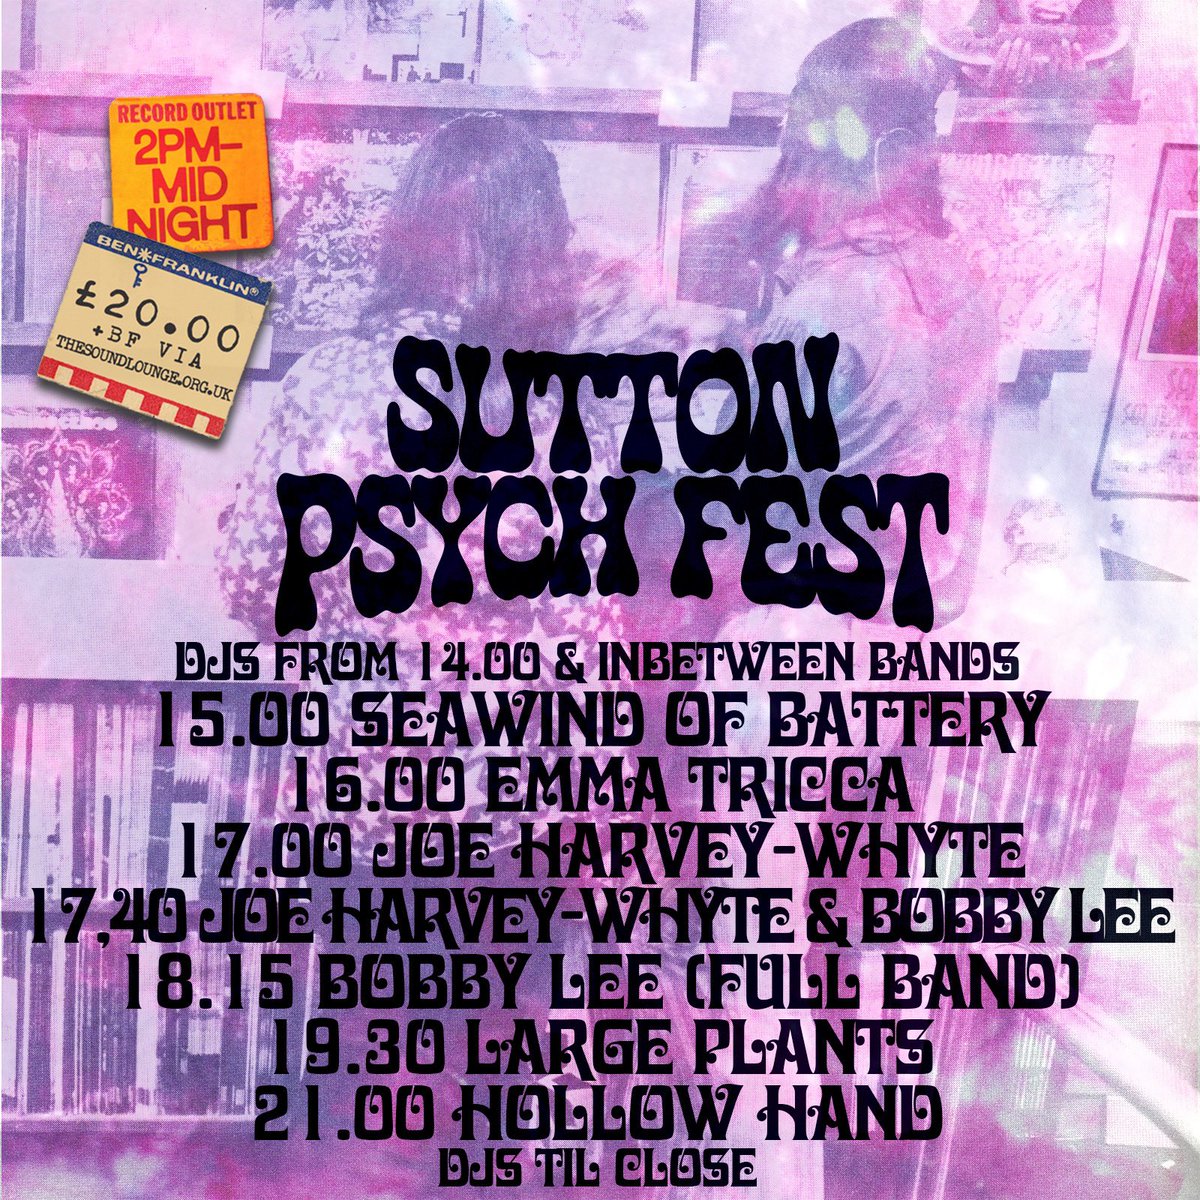 Here’s the timings for Sutton Psych Fest this Saturday at @soundloungeCIC . I’ll be doing a full band show and a set of new material with Joe Harvey-Whyte. @seawndofbattery @emmatricca @LargePlantsBand @hollowhand @Dannythechamp